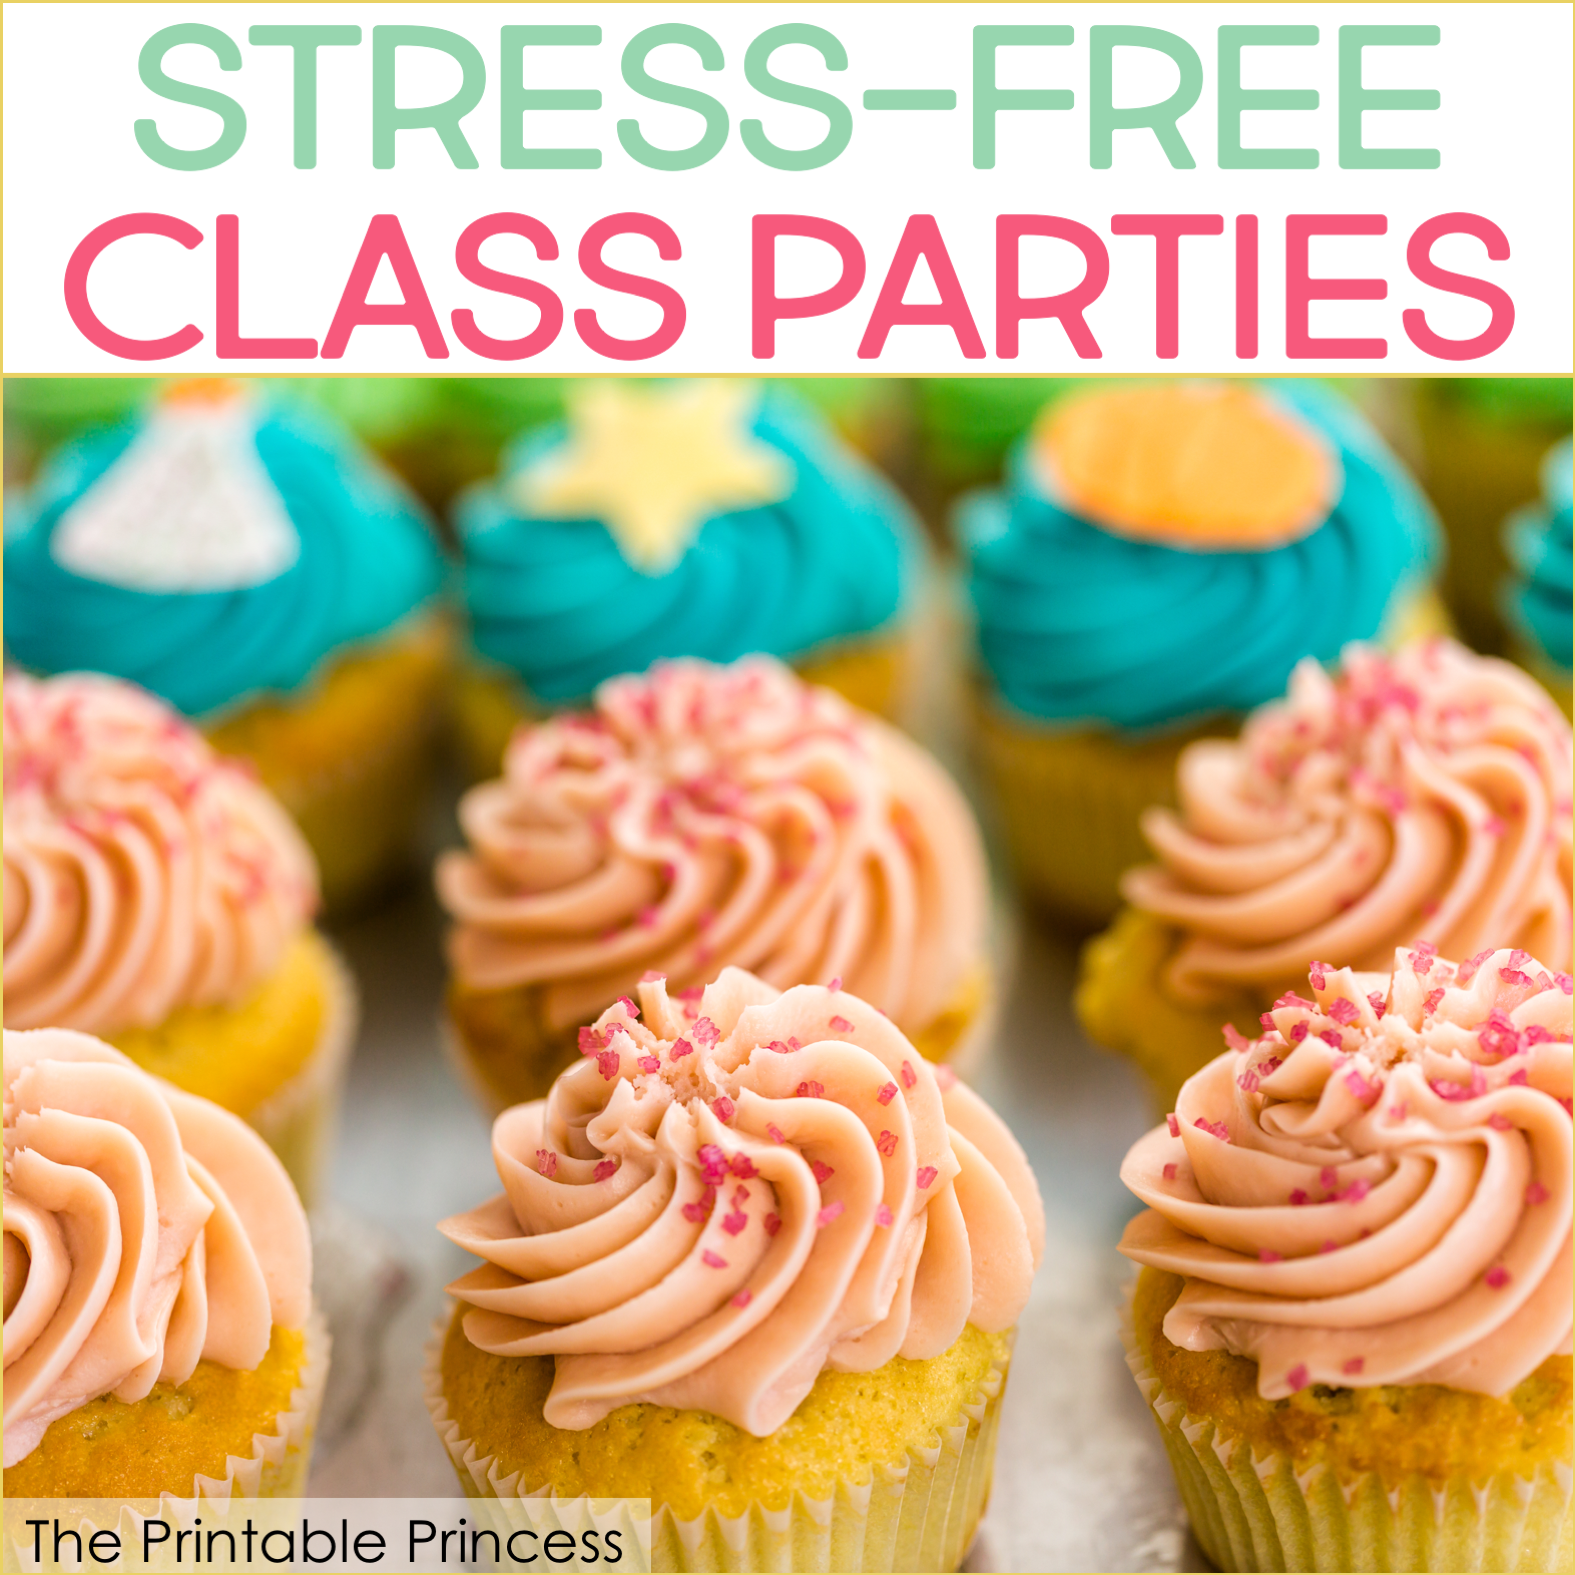 3 Rules for Stress-Free Classroom Parties